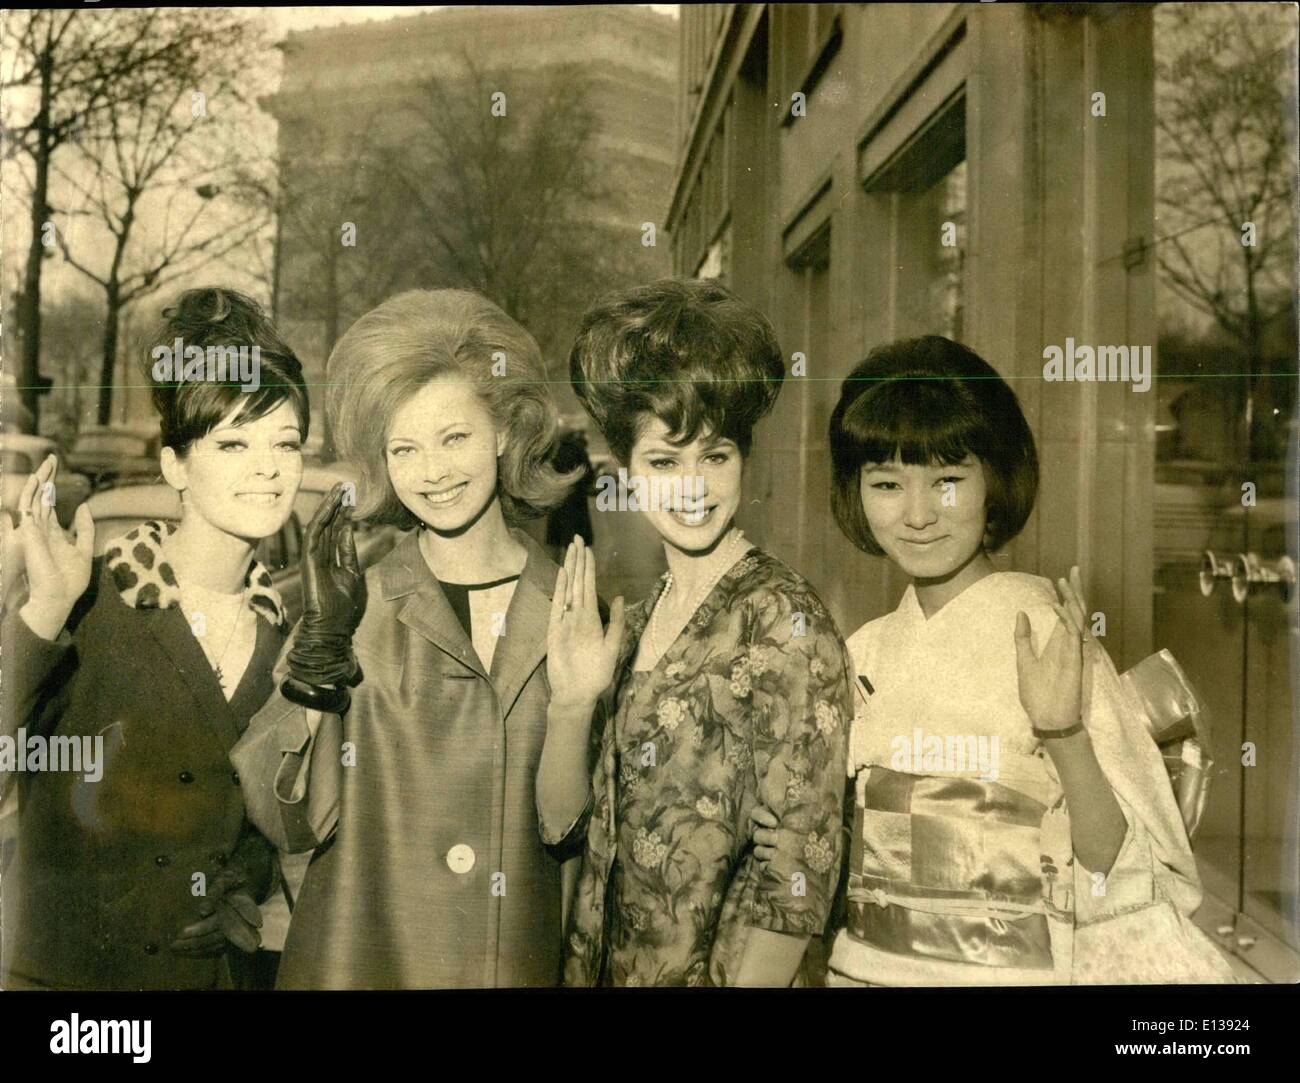 Feb. 29, 2012 - Un ''Misses'' in Paris.: After the first ''Miss Uno'' election held in Palma De MAjorca ''Miss uno'' and her ladies in waiting are spending a few days in Paris. Photo shows L.to R. Sabing Surget (Miss France, 1st Lady in waiting) Monica Ragby (Swedish Miss Uno, 20), Gudrun Bjarnadottir (Miss Islande) and Chie Murakami (Miss Japan) Stock Photo